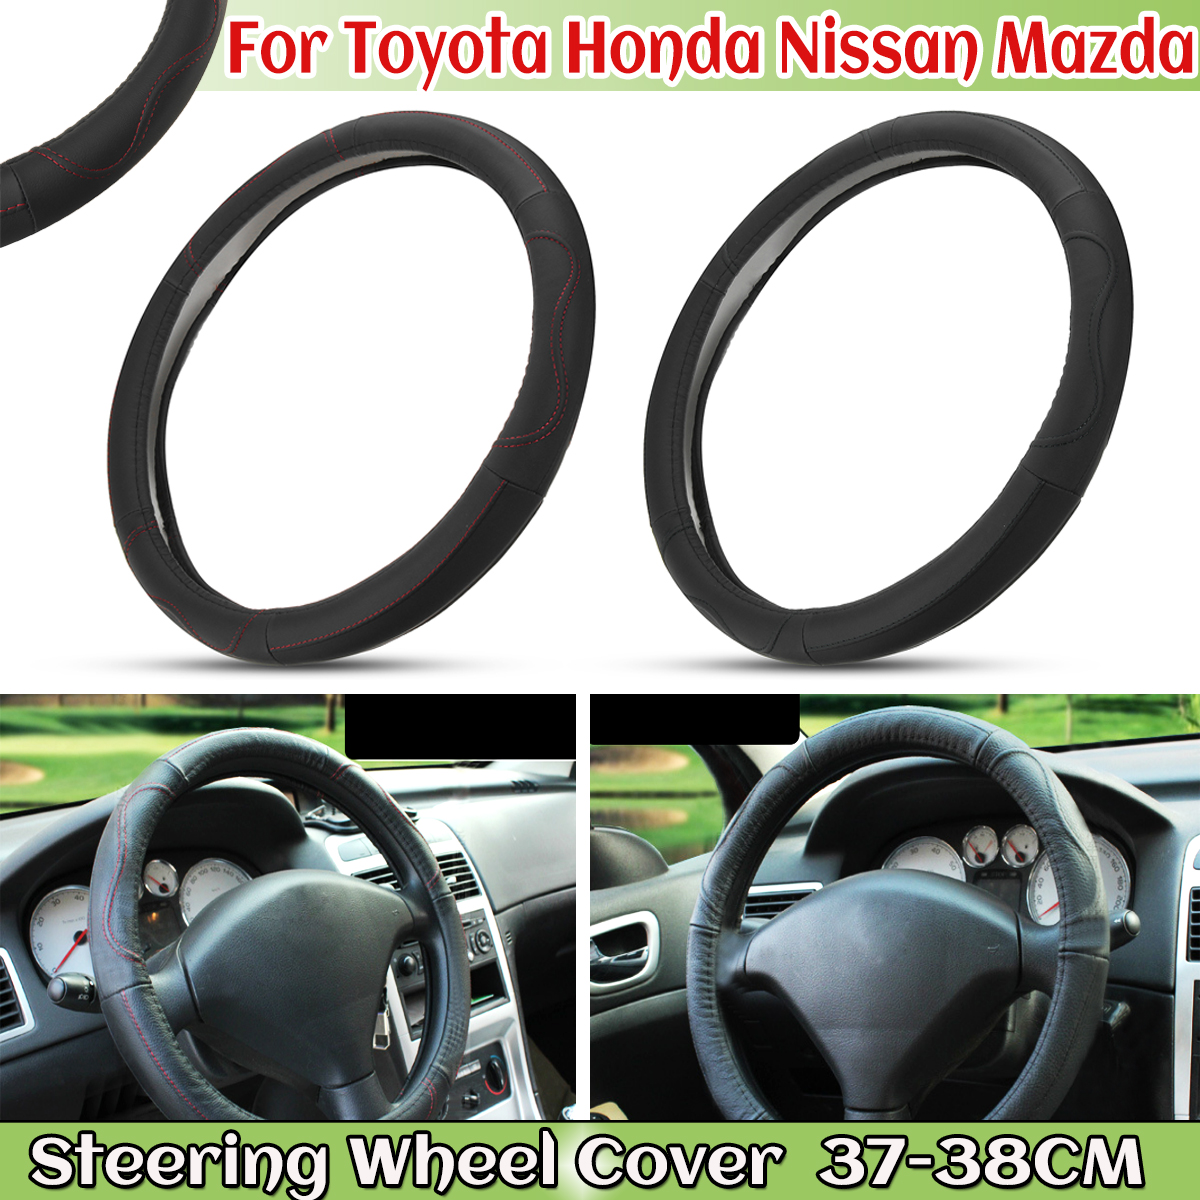 37-38cm-PU-Leather-Car-Steering-Wheel-Covers-Anti-Slip-for-ToyotaHondaNissanMazda-1359086